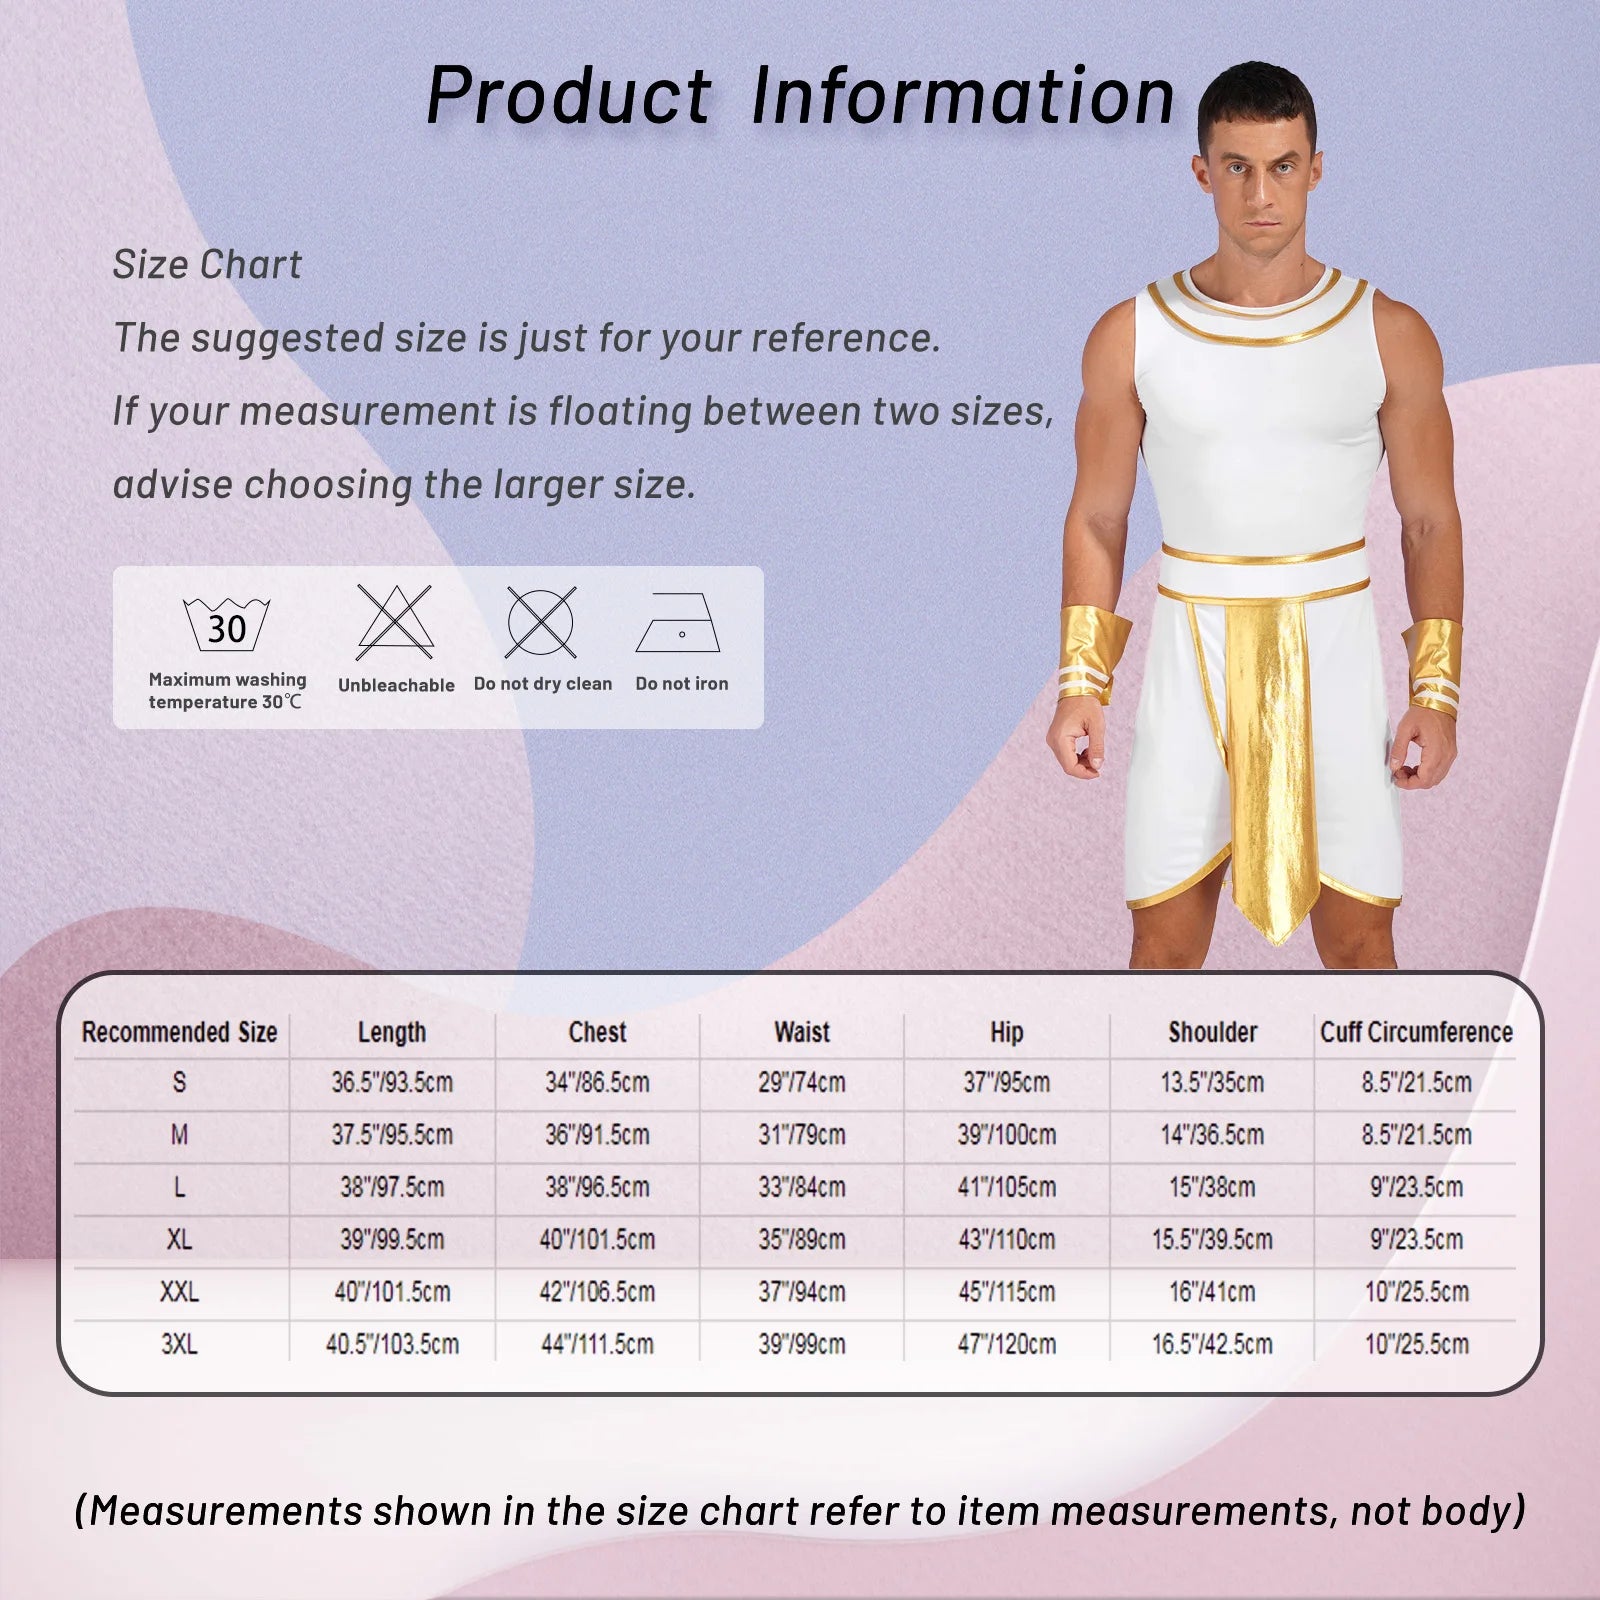 A man in a white and gold costume stands beside a size chart for this Medieval-inspired outfit, detailing measurements for various sizes in centimeters and inches. Laundry icons indicate washing instructions. Perfect for Maramalive™ Adults Men's Ancient Egypt Costume Halloween Greek Roman Toga Cosplay Dress One Shoulder Strap Suspender Ruffle Skirt Dress Up or those looking to recreate their favorite Movie & TV characters.